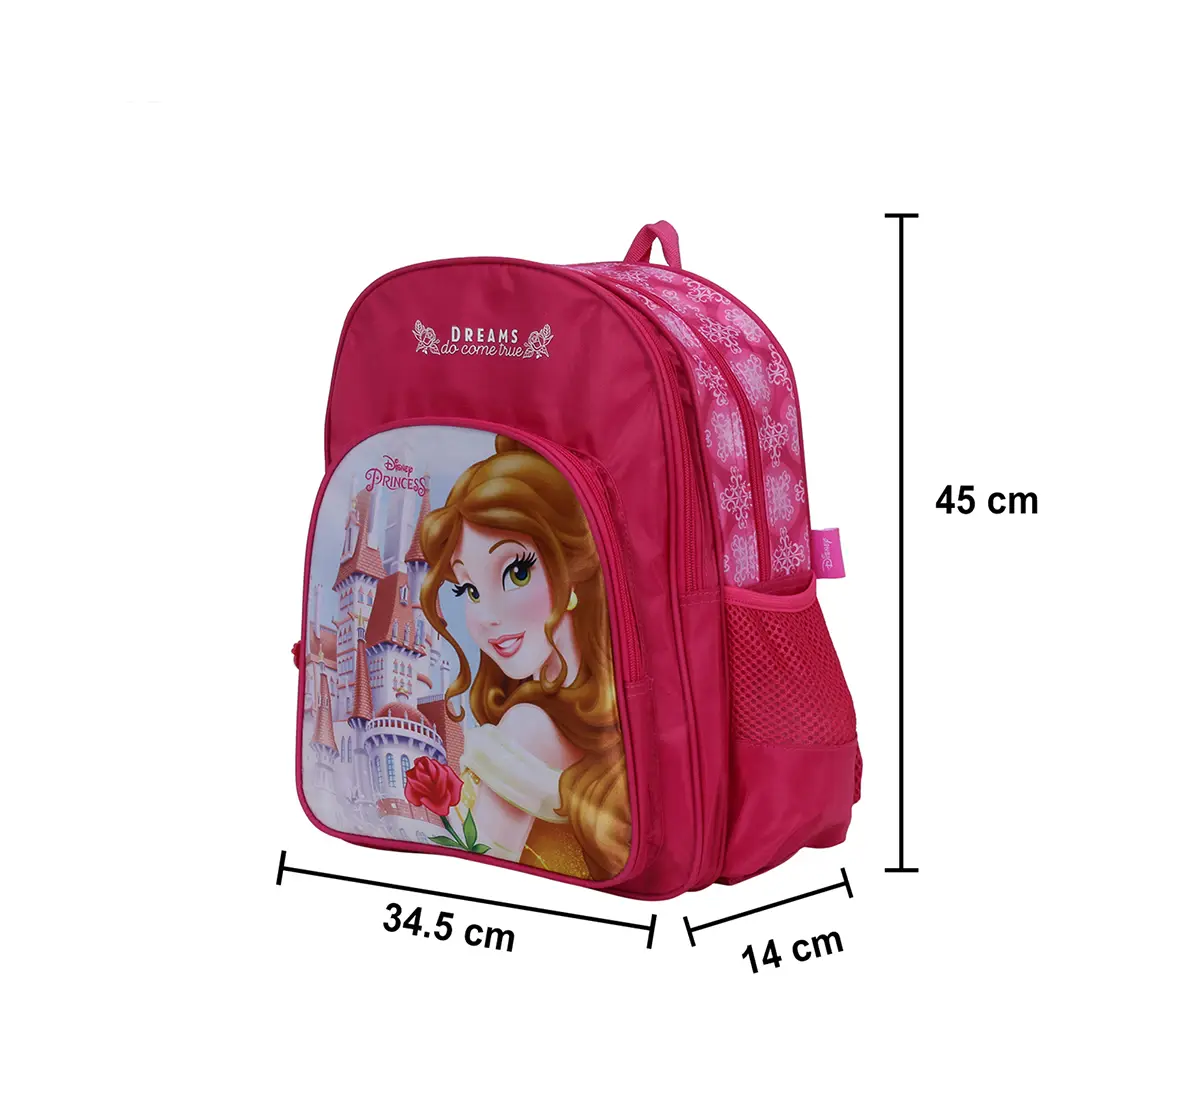 Disney Princess Castle 18" Backpack Bags for age 3Y+ 